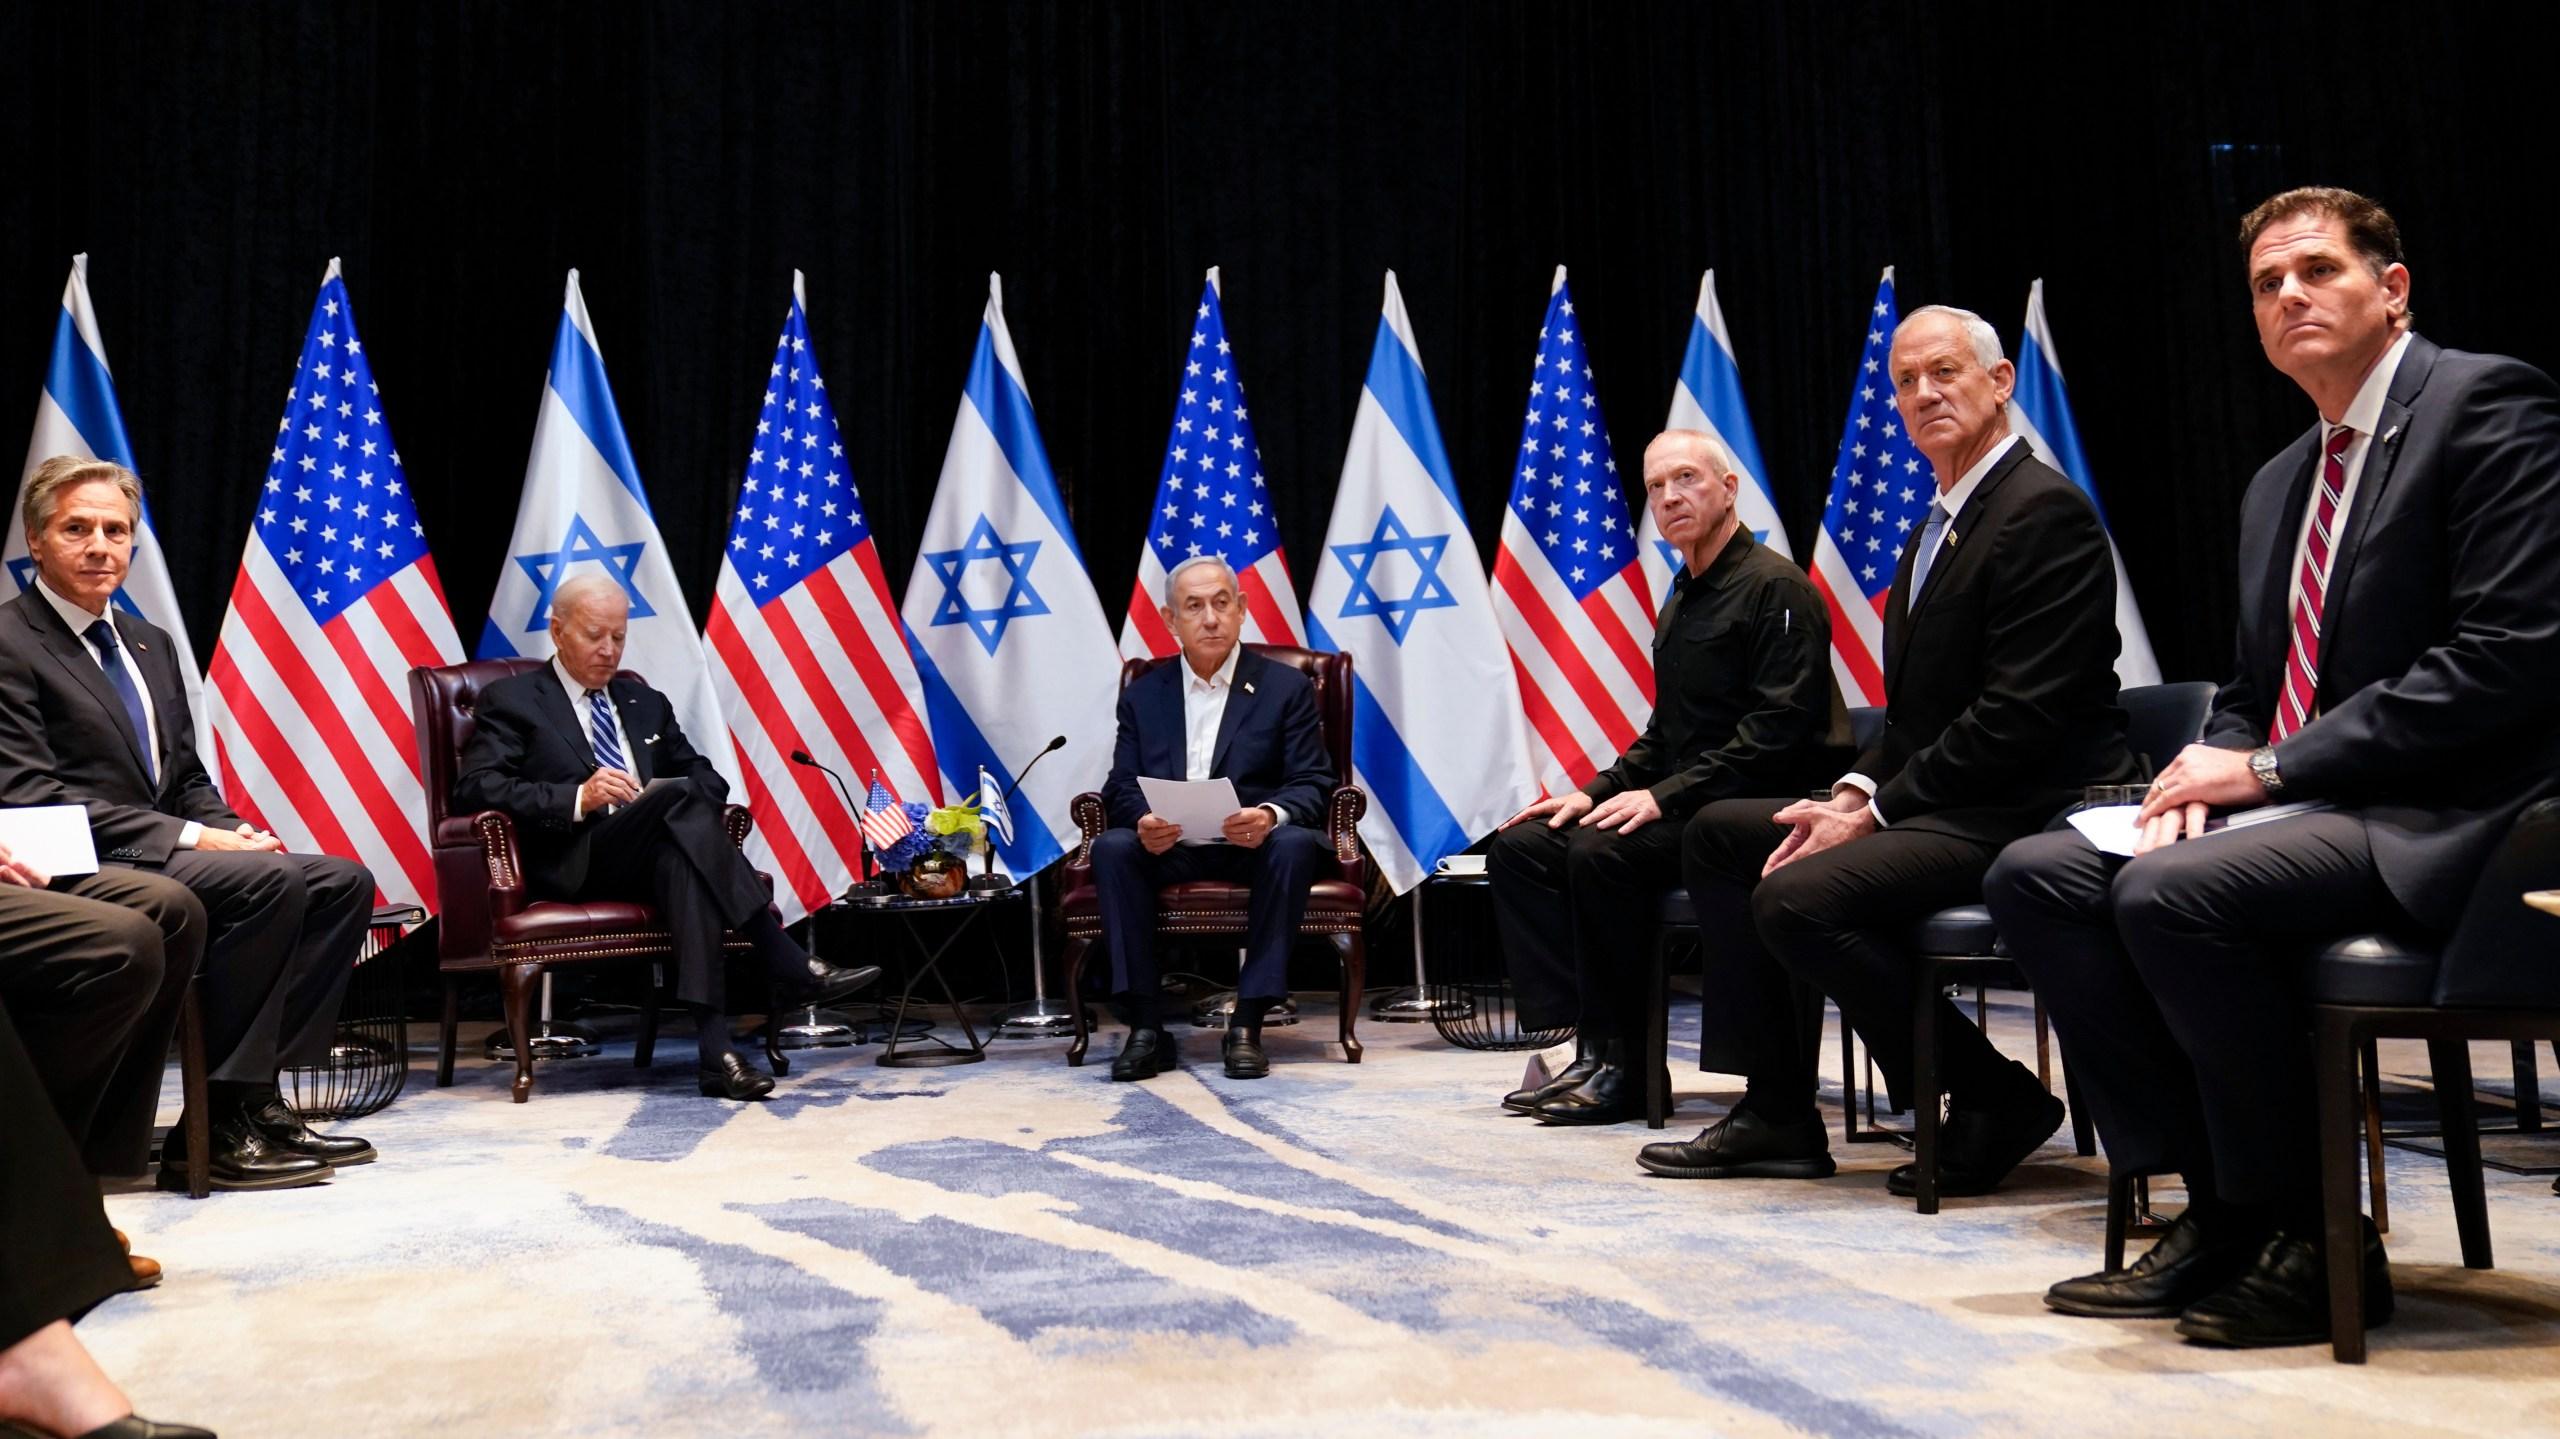 President Biden wraps up his visit to wartime Israel with a